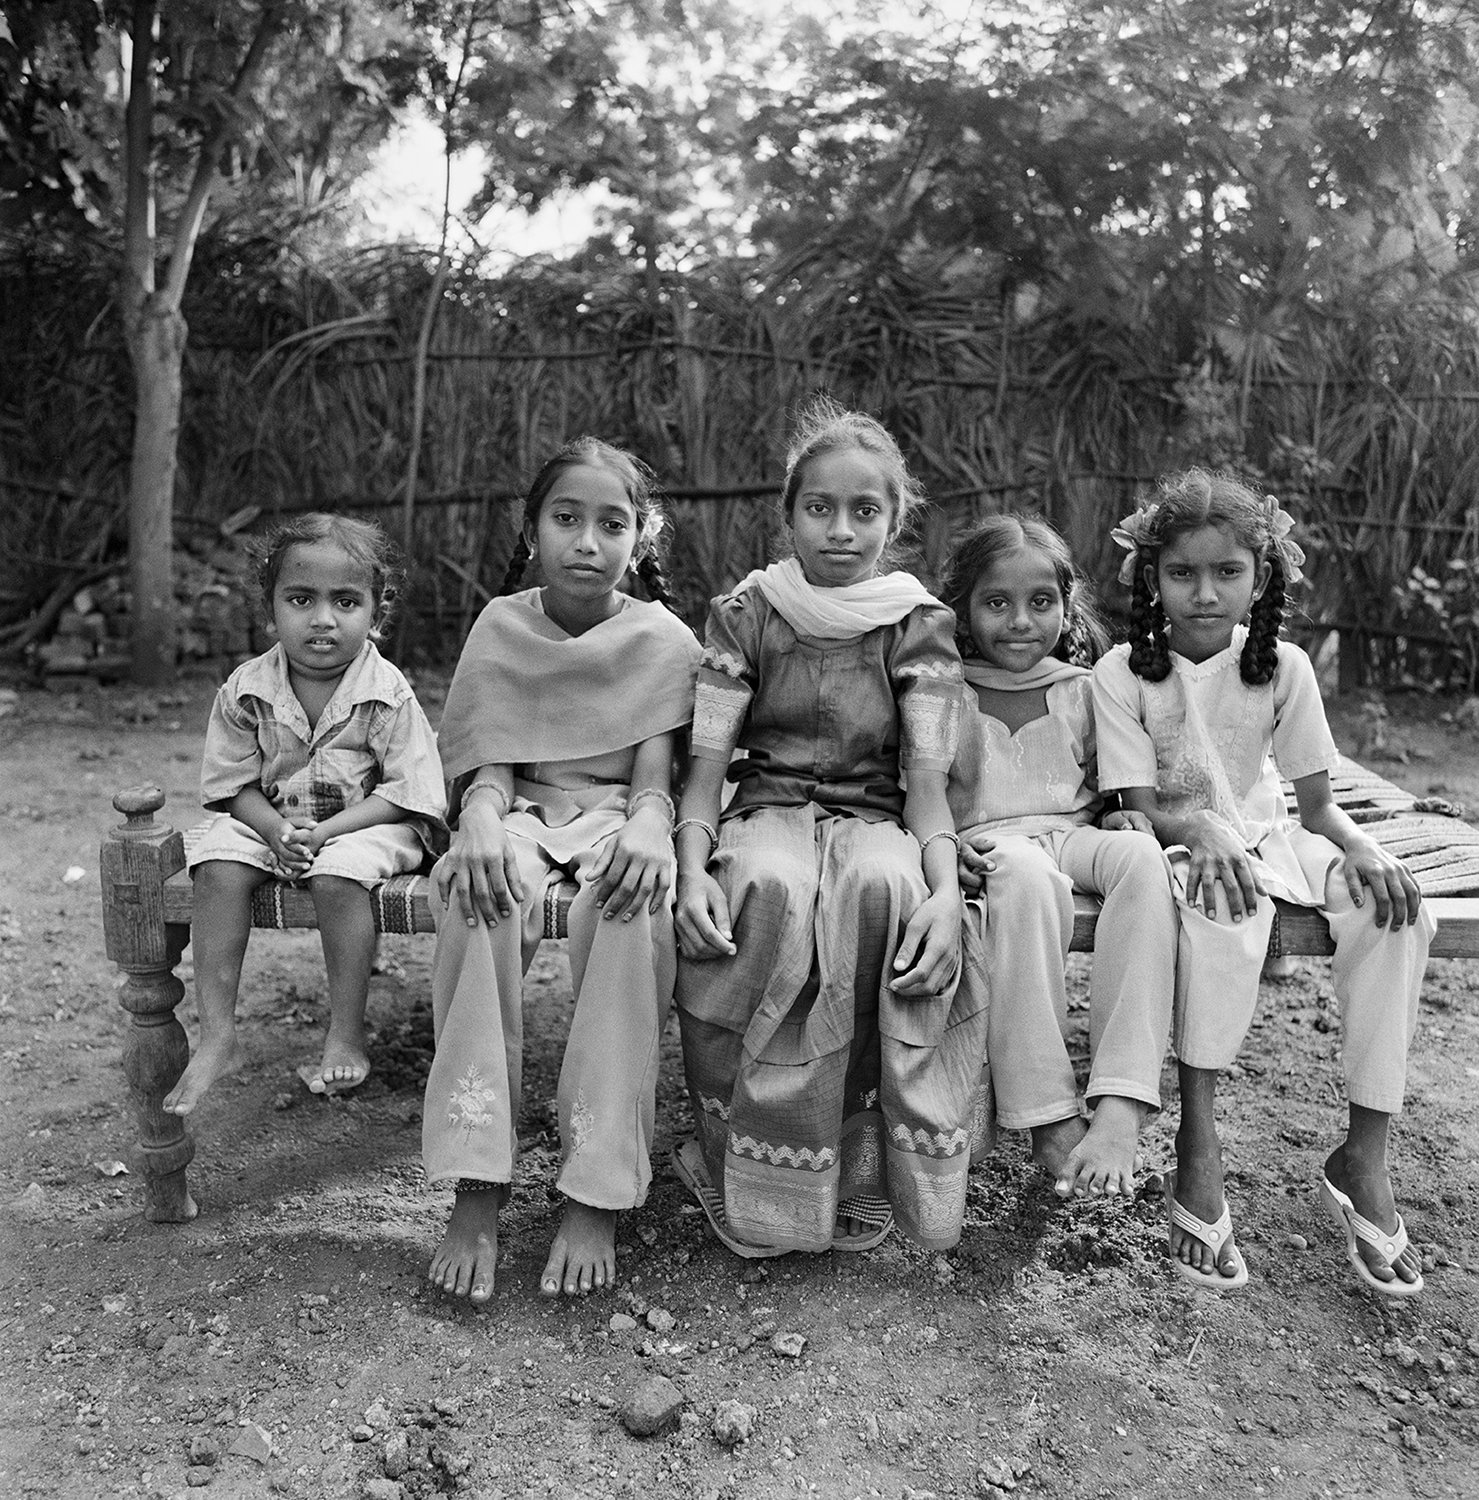 Five Young Girls on a Bench- Kottarddipalem, India 